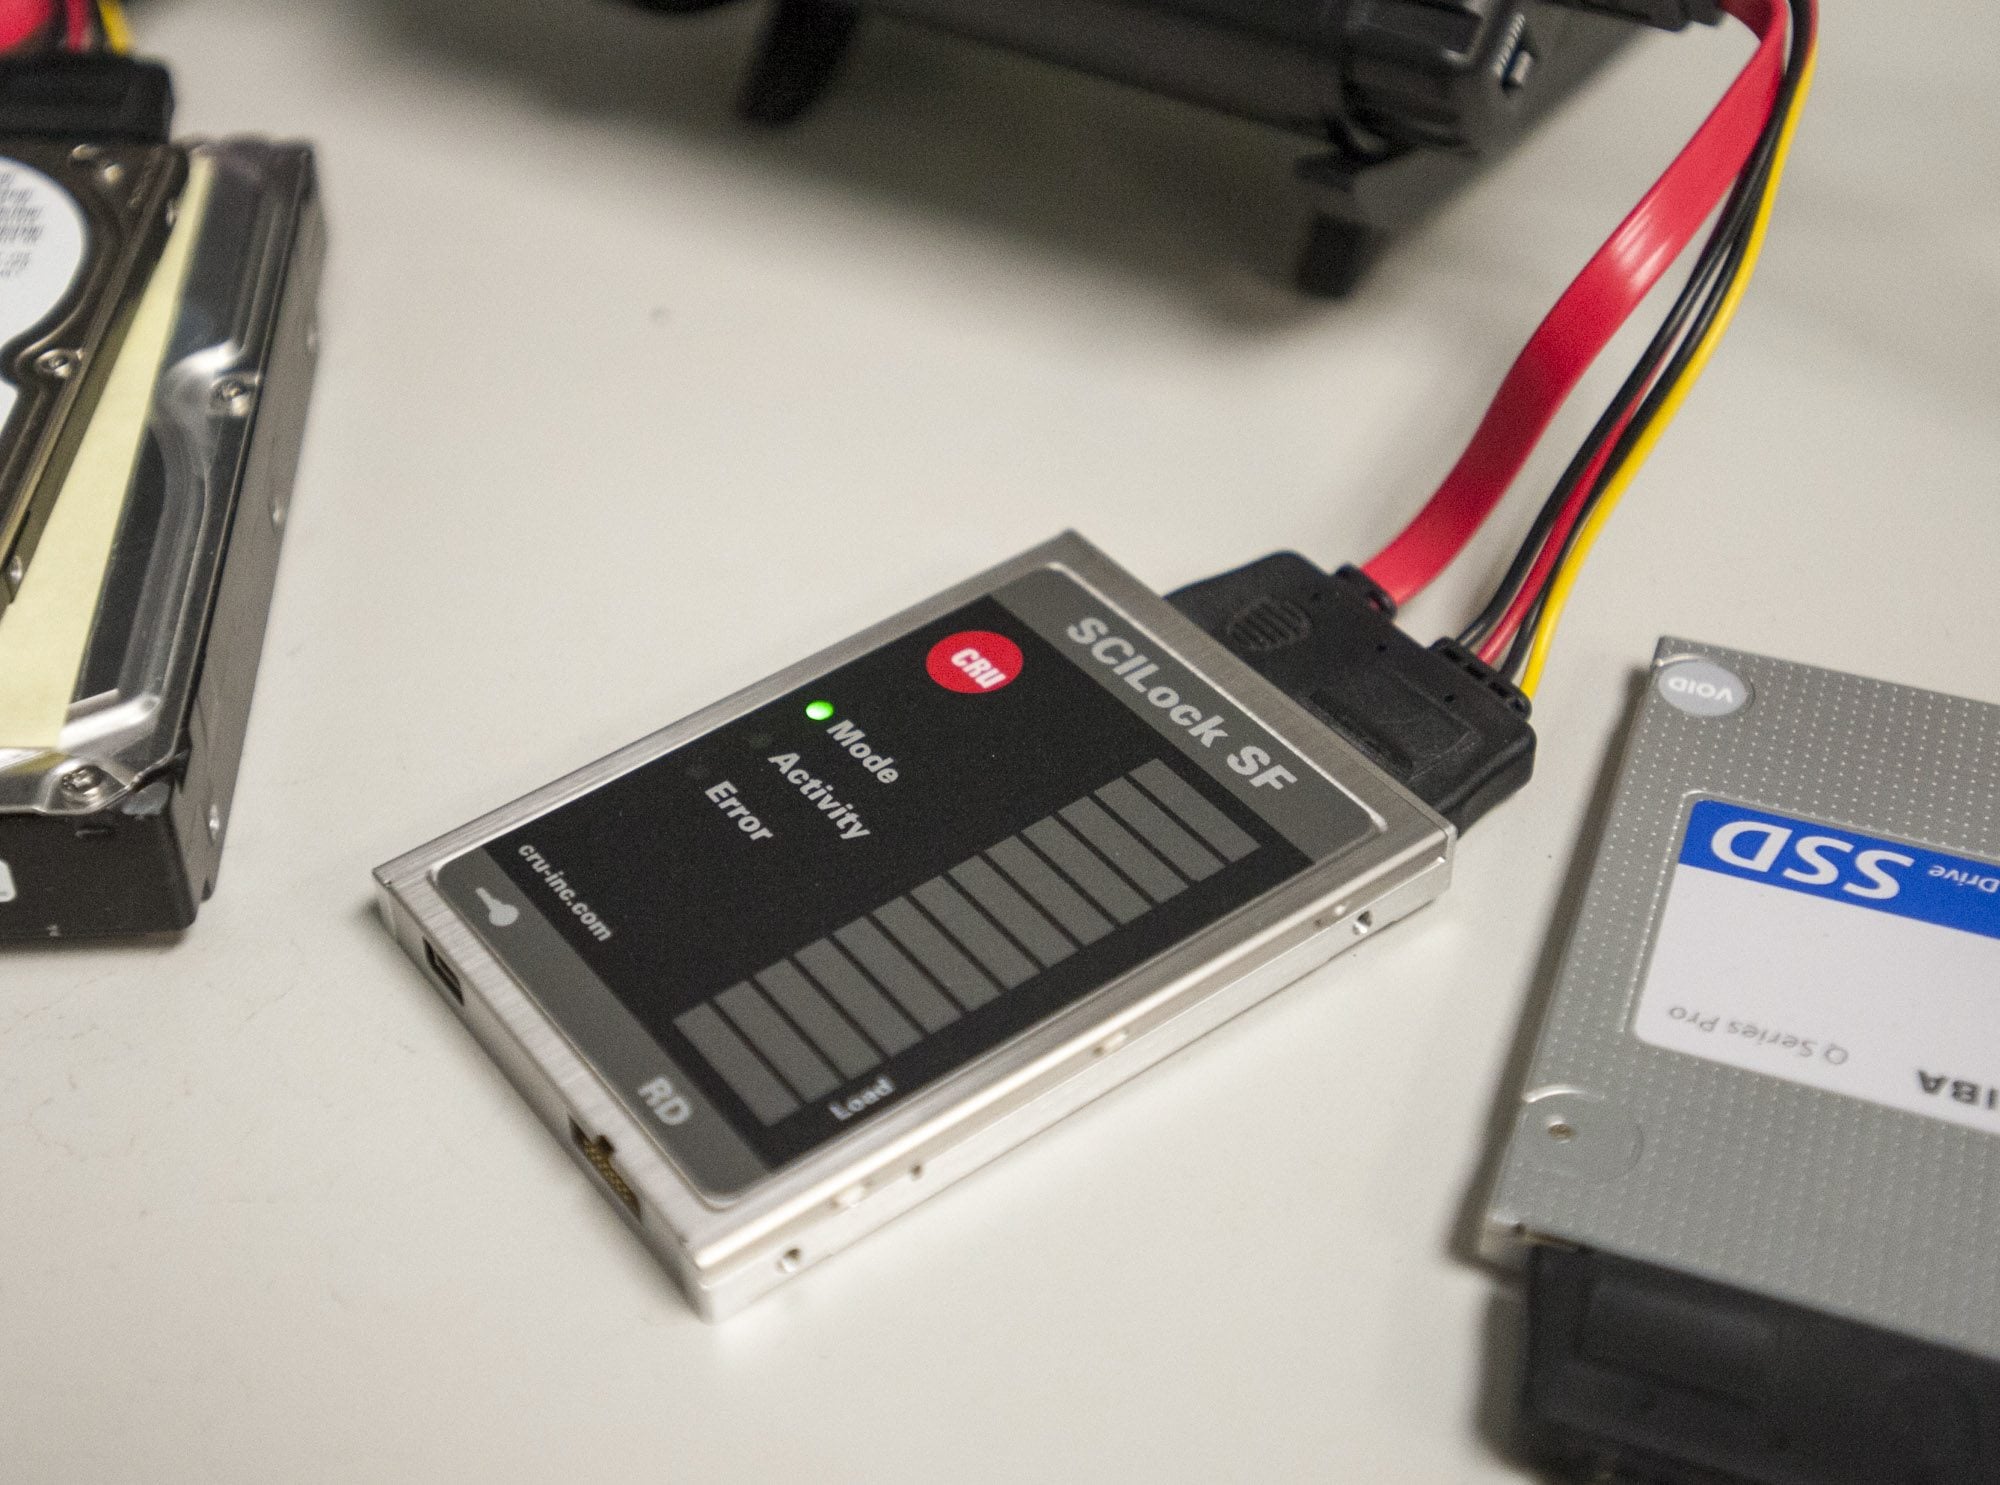 A new hard drive made by local tech company CRU Inc. went into wide release Monday. The SCILock Secure Drive uses hardware, rather than software, to keep data secure from hackers and malicious software.